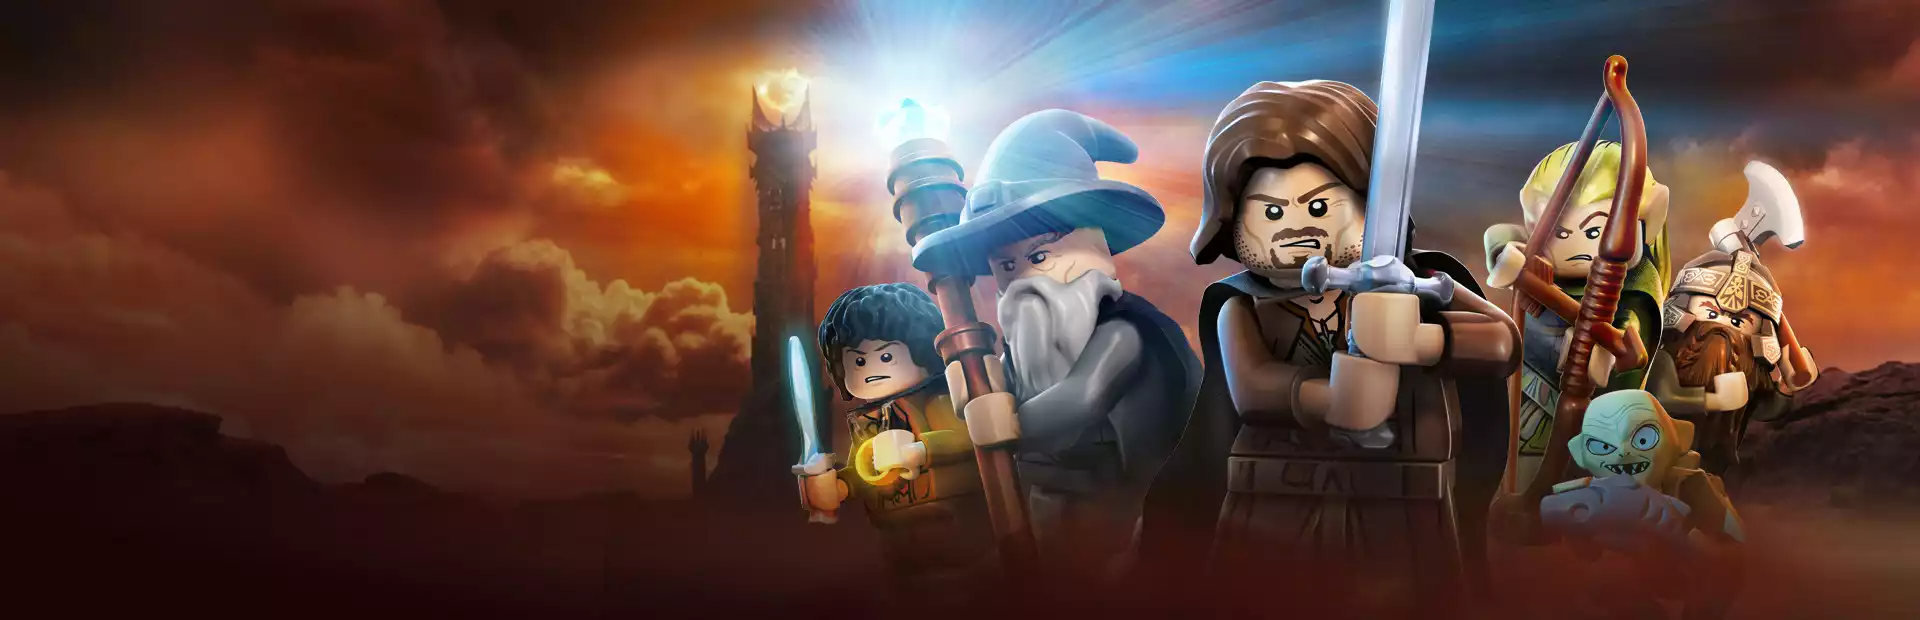 Lego Lord of the Rings Steam Key GLOBAL